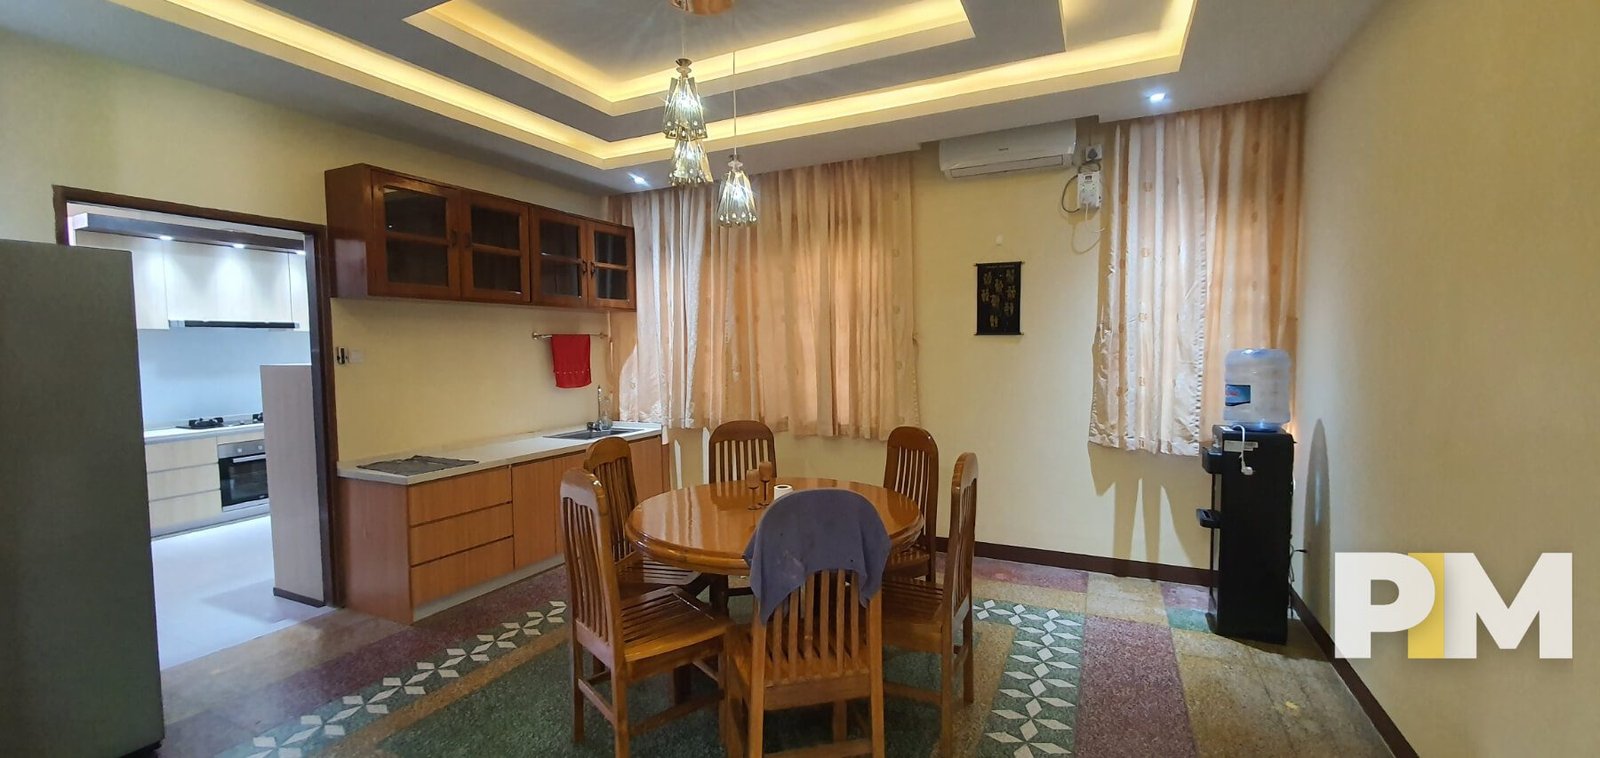 Dining tabel and chairs - Yangon Real Estate